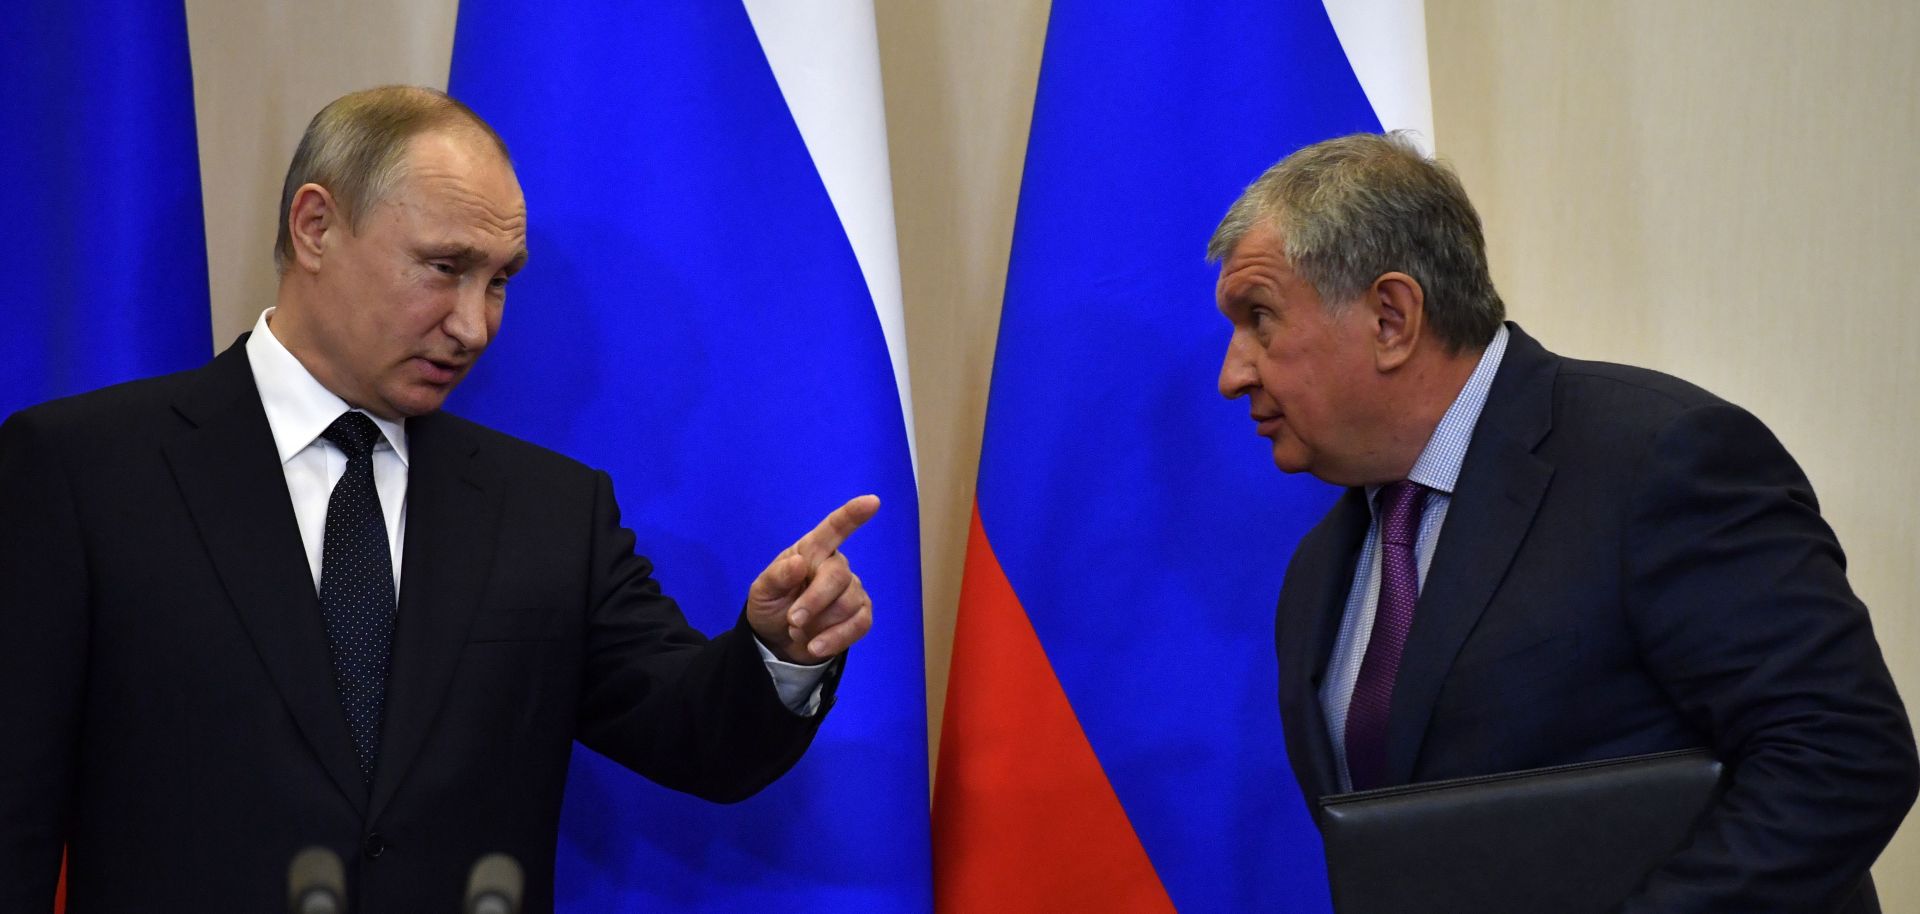 Russian President Vladimir Putin meets with Igor Sechin, the CEO of oil giant Rosneft, on May 17, 2017.